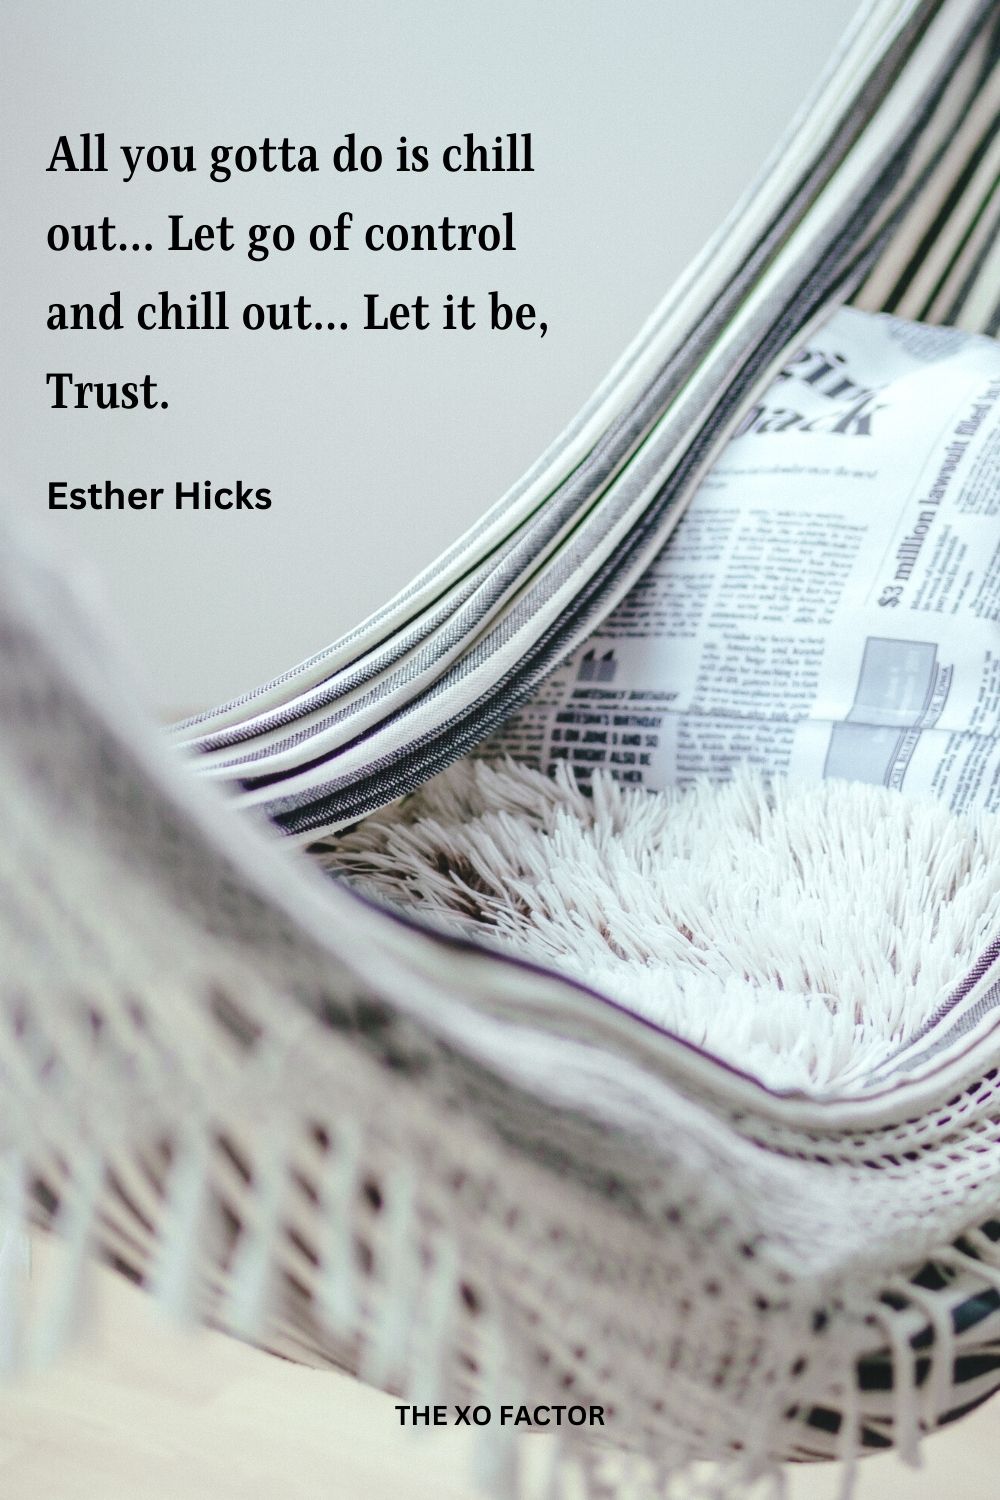 All you gotta do is chill out... Let go of control and chill out... Let it be, Trust.
Esther Hicks